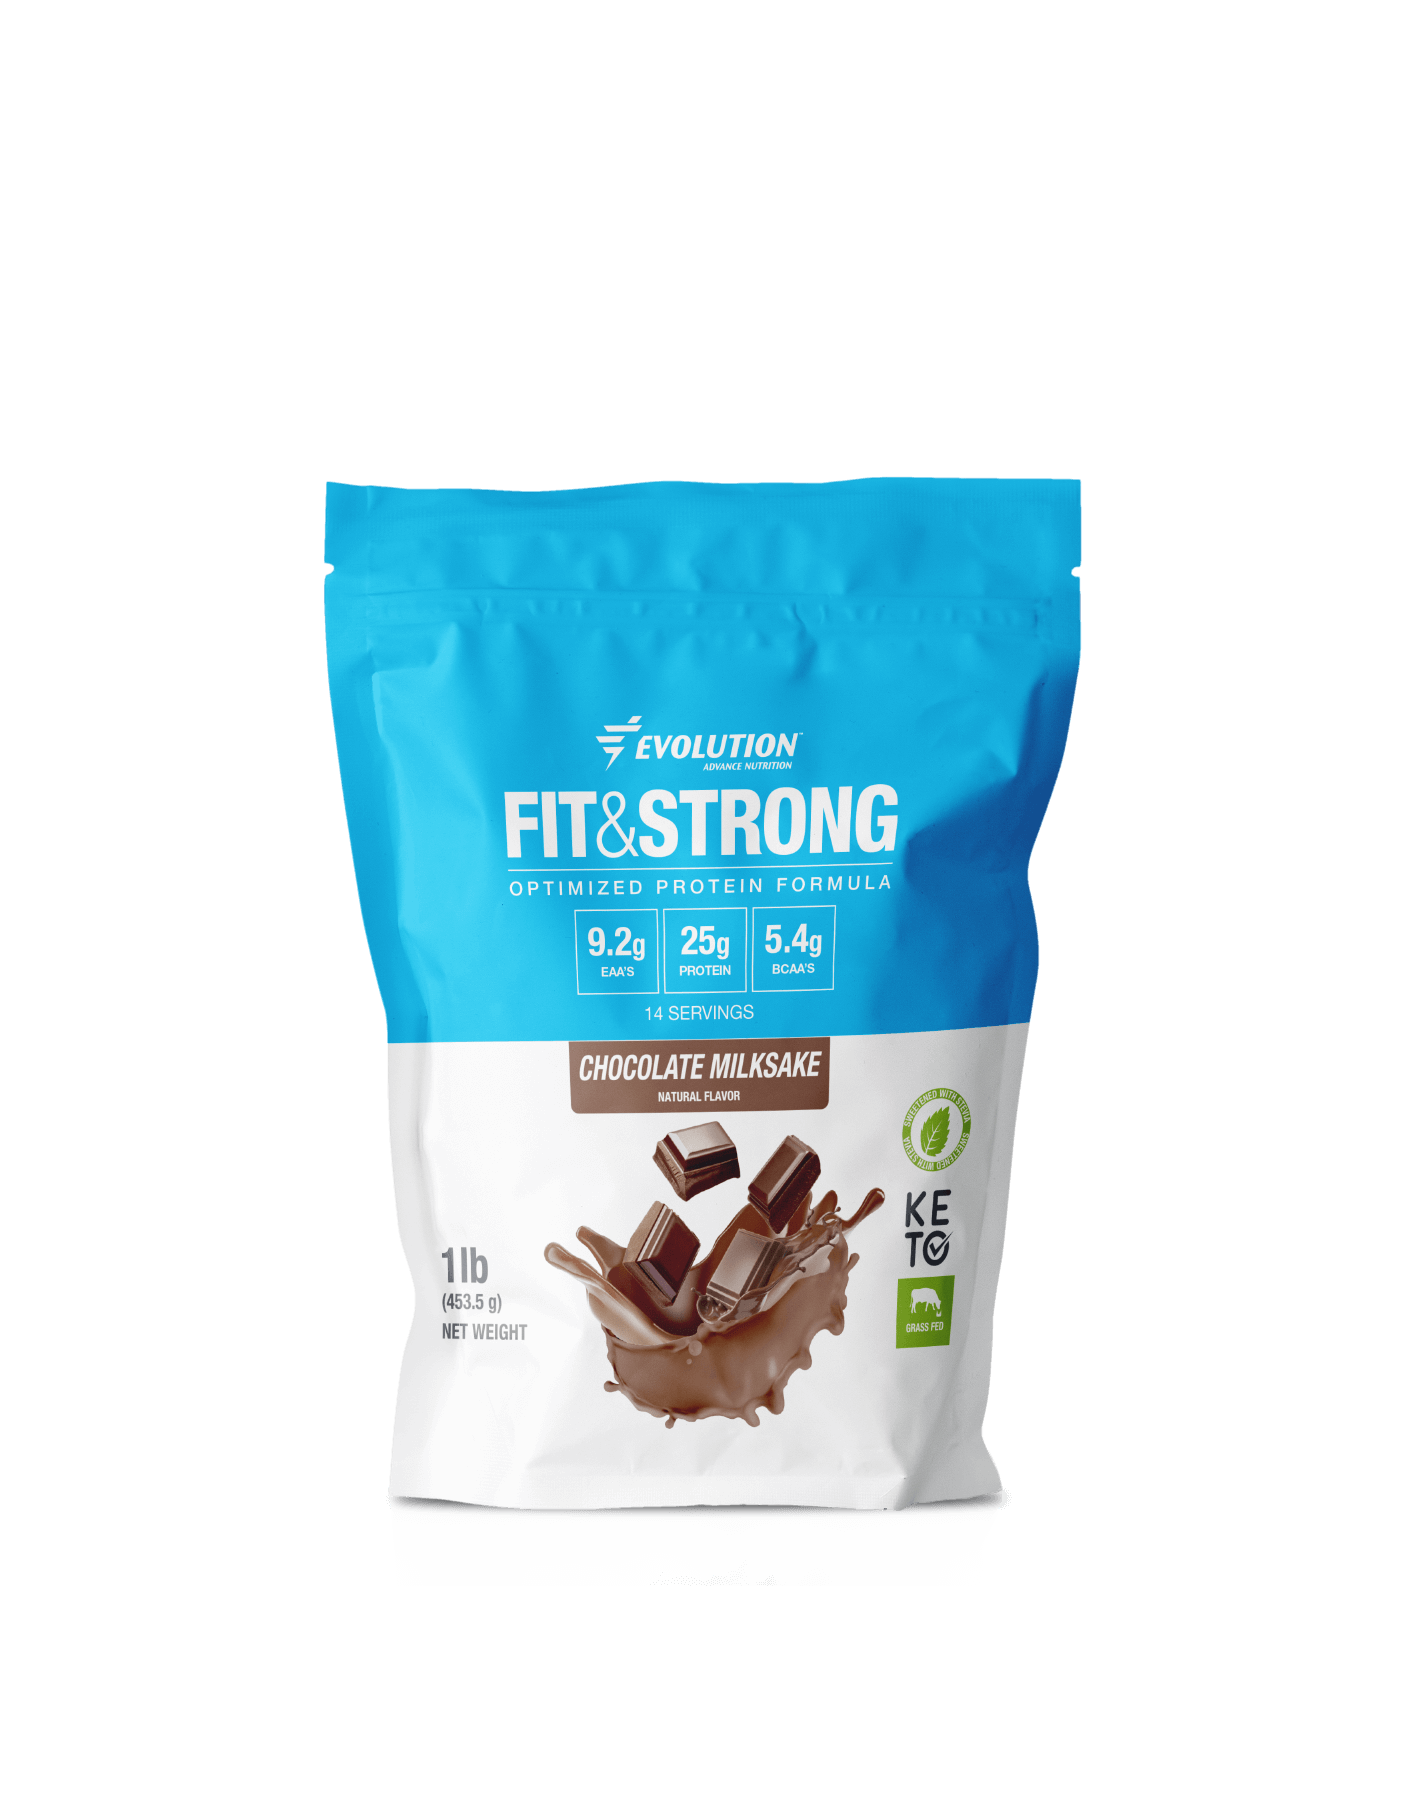  FIT & STRONG PROTEIN